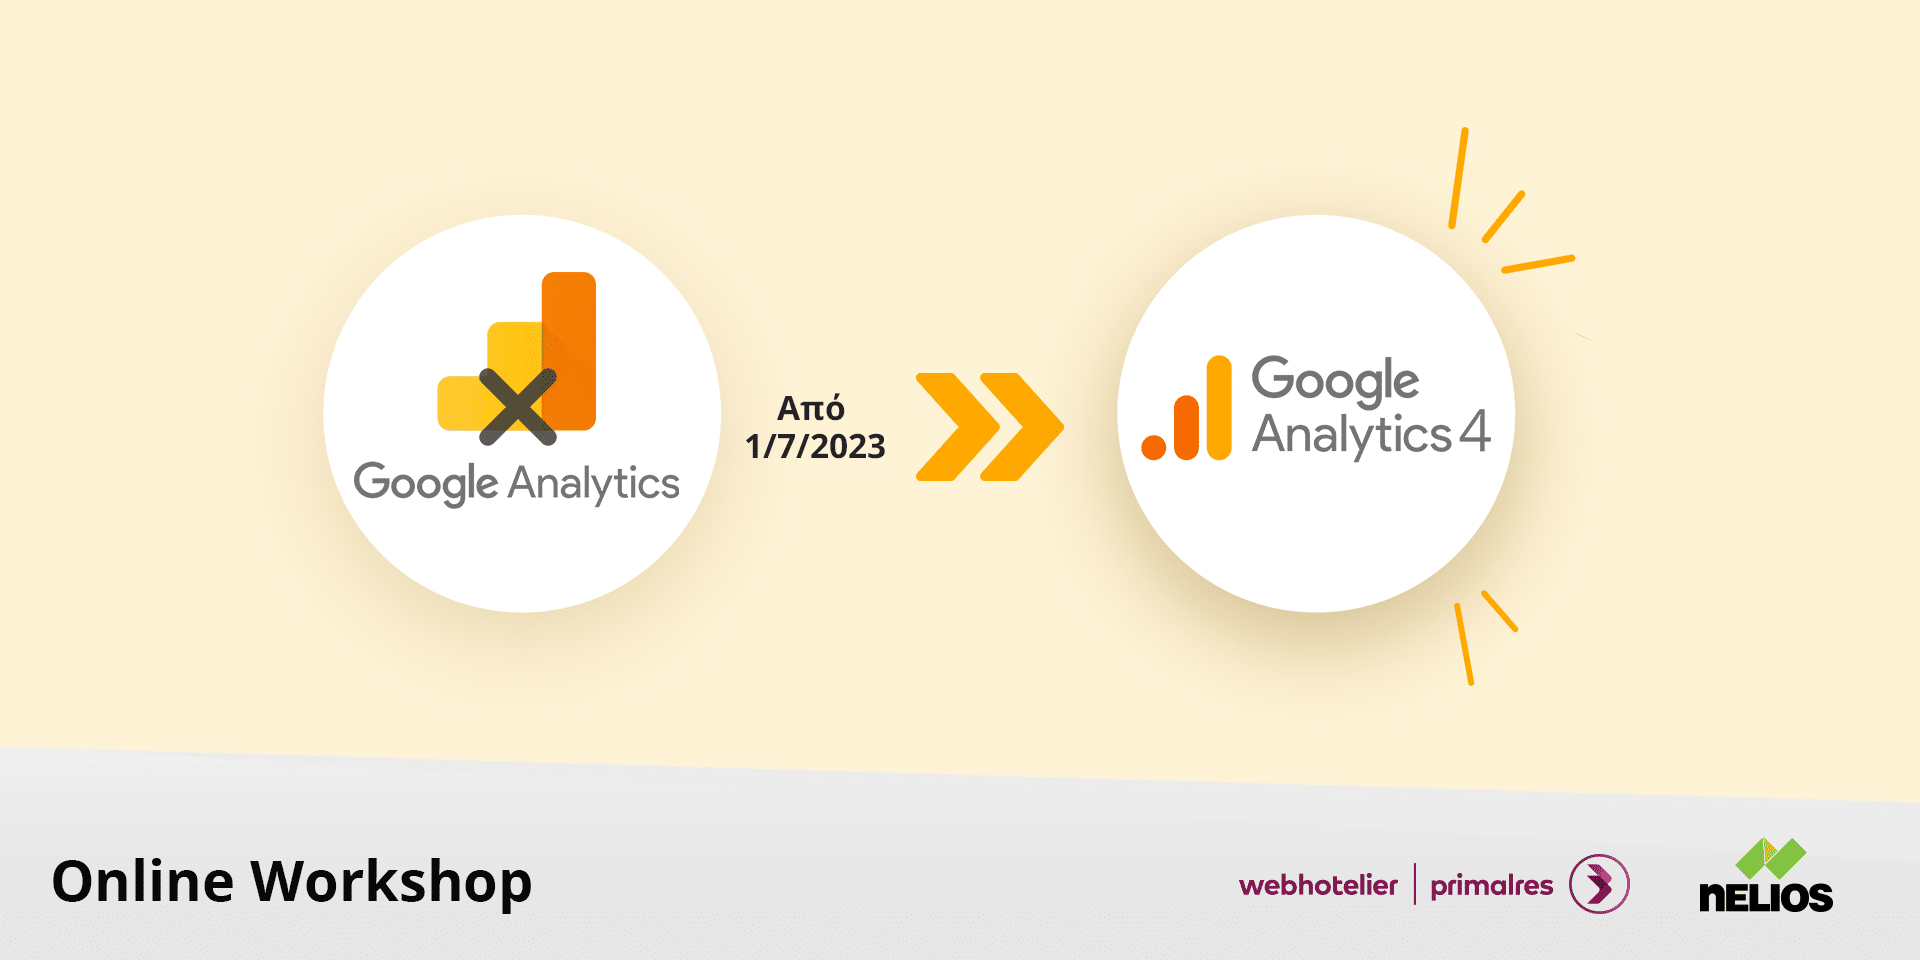 Google analytics 4 for hotels workshop by Nelios and Webhotelier